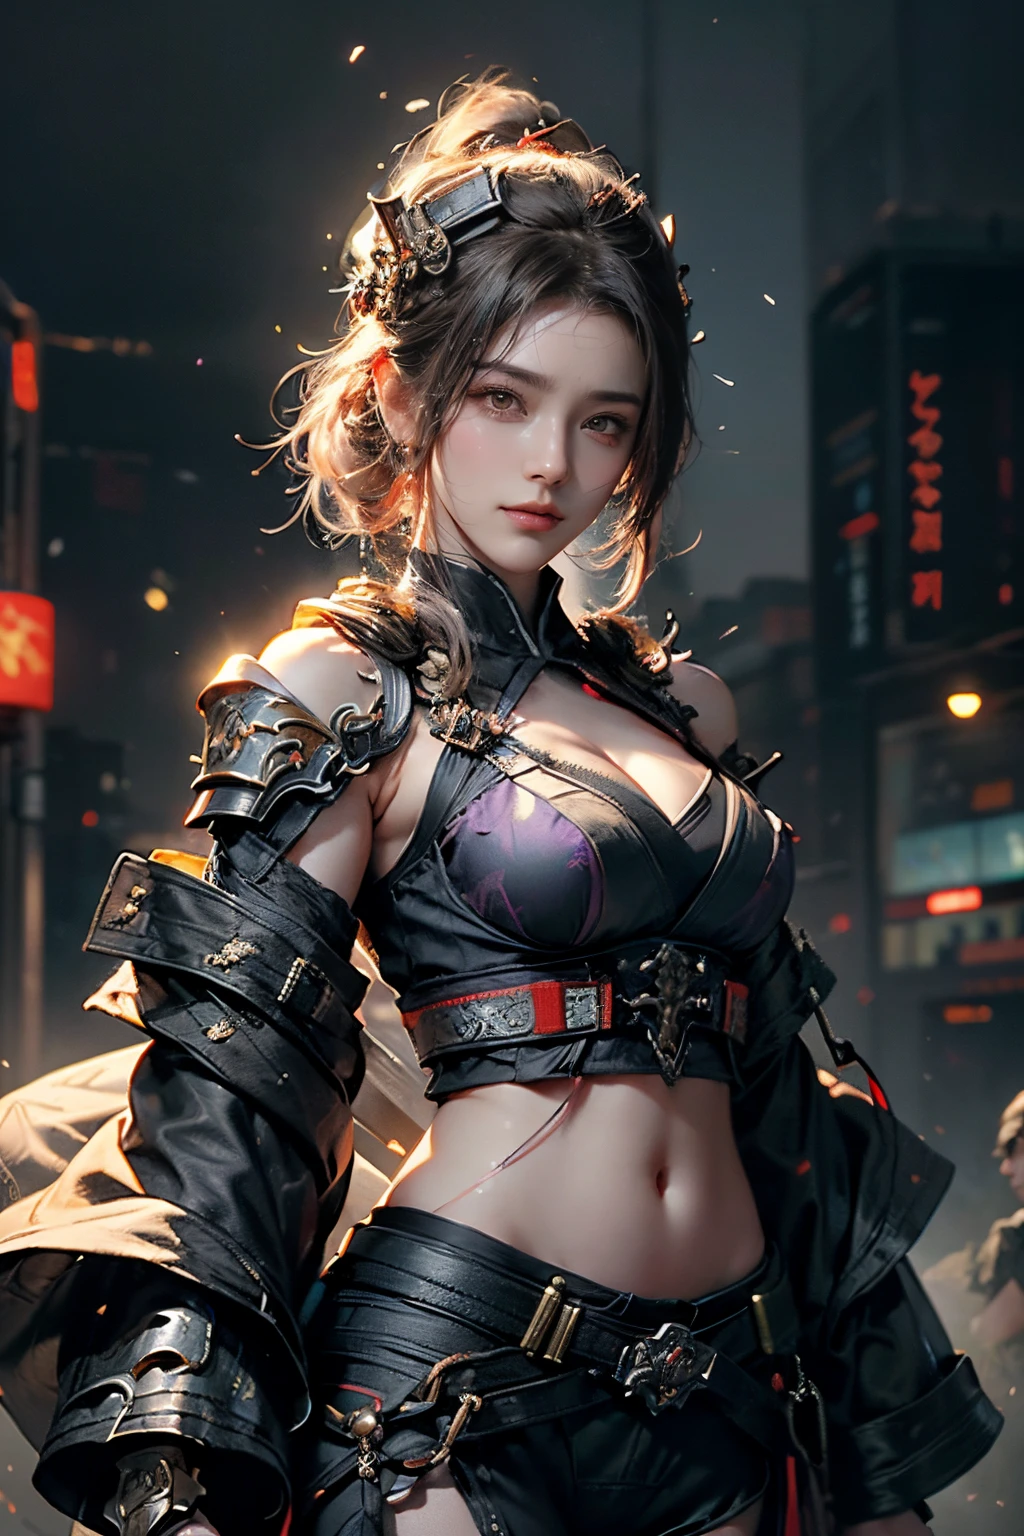 high high quality,A high resolution,masterpiece,8K,(Hyperrealistic photos),(Portrait),digital photography,(Reality:1.4),20-year-old girl,exquisite facial features,a purple eye,Red Eyeshadow,((Chinese warrior in cyberpunk style)),Random hairstyles,(red tinted hair),Big breasts,Cleavage,(Cyberpunk combat suit that mixes sci-fi and ancient style,Openwork design,Metal shoulder pads,complex clothing patterns,Bamboo hat),(Show navel),Keep your mouth shut,Frowning,ssmile,Cold and serious,extremely detailed expression,realistic detail,Light magic,Photo pose,oc render reflection texture